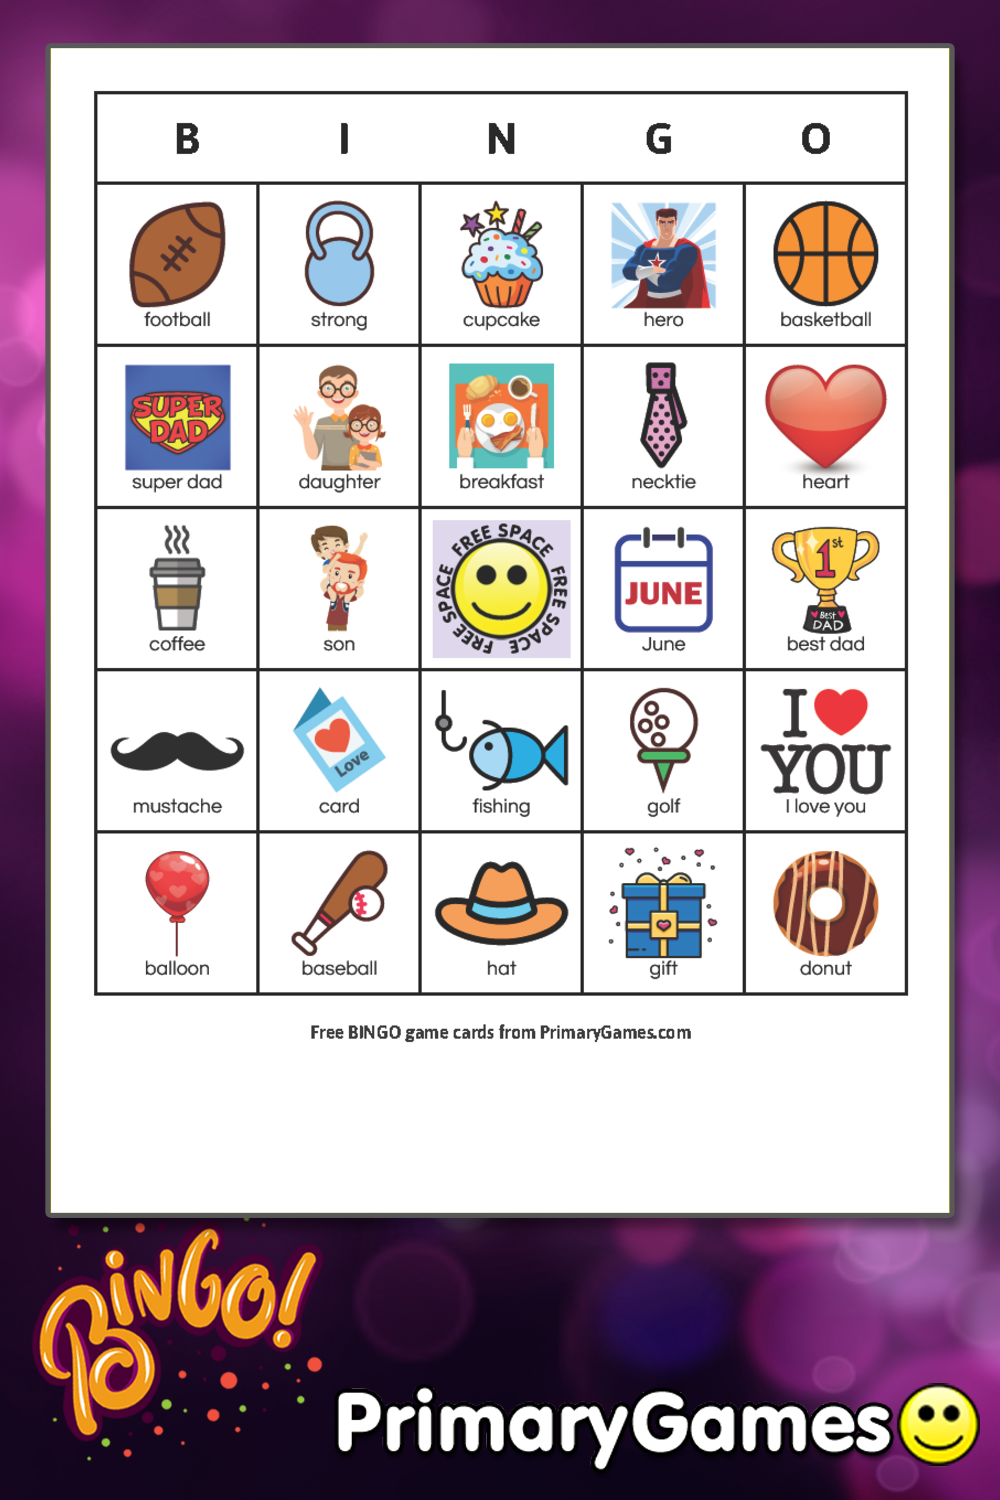 father-s-day-bingo-game-card-free-printable-game-from-primarygames